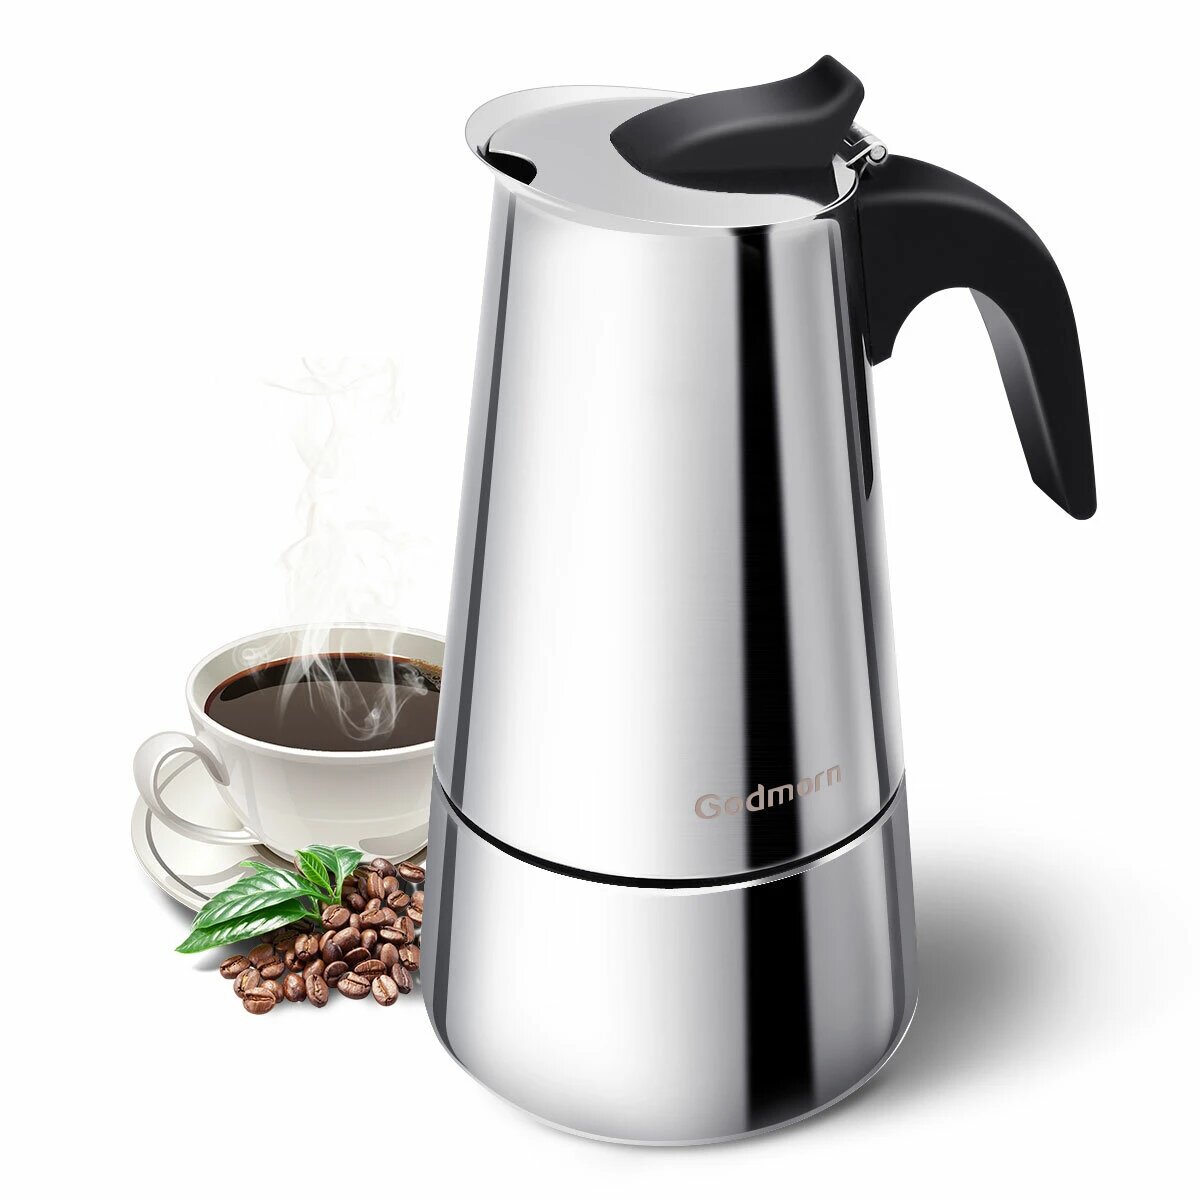 Godmorn Stainless Steel Espresso Pitcher, 450ml/15oz/9cups, Suitable for Conduction Cookers